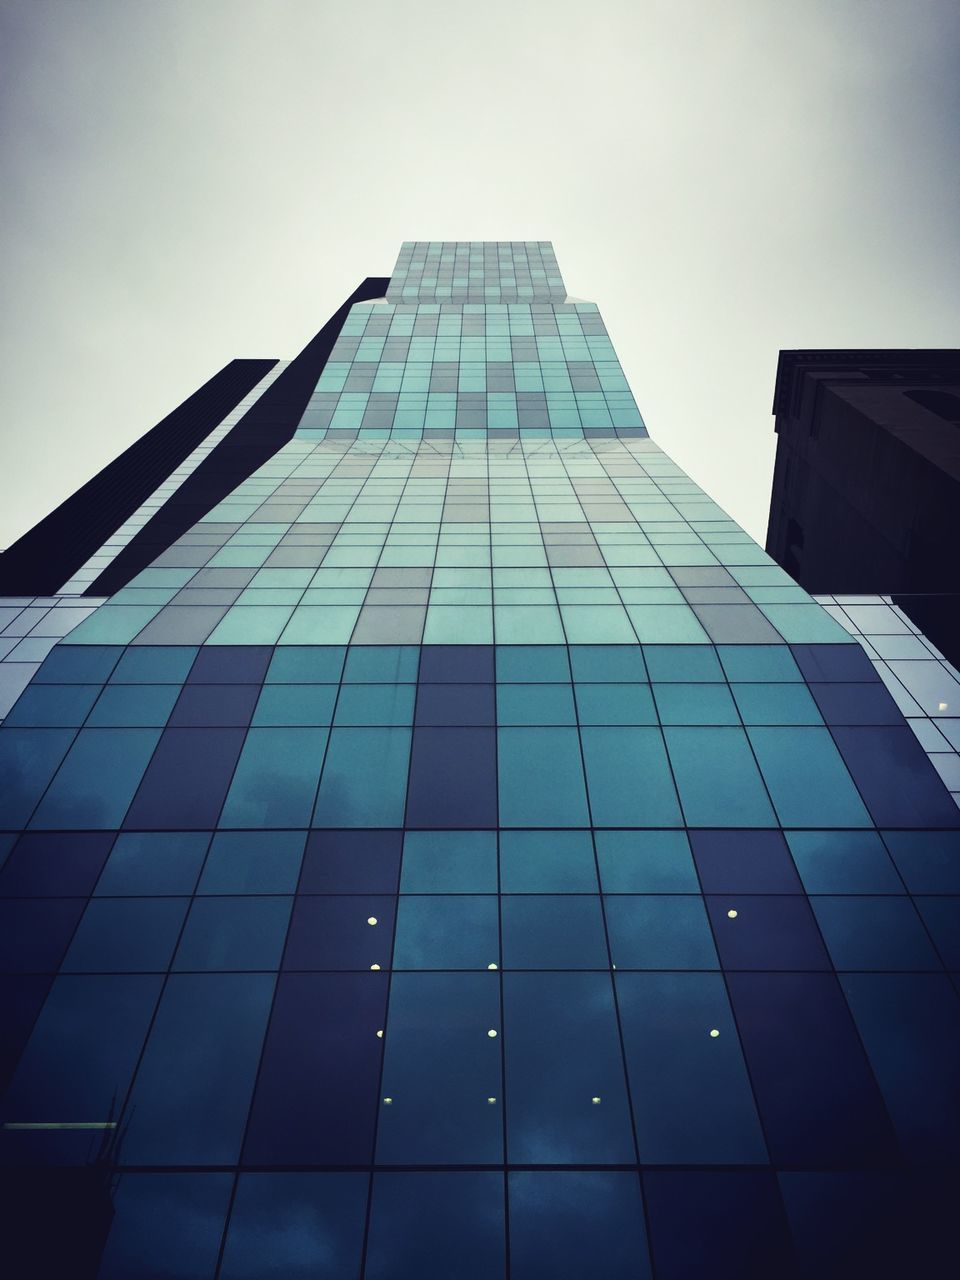 architecture, building exterior, built structure, low angle view, modern, office building, skyscraper, tall - high, city, tower, glass - material, reflection, sky, building, clear sky, day, tall, architectural feature, outdoors, no people